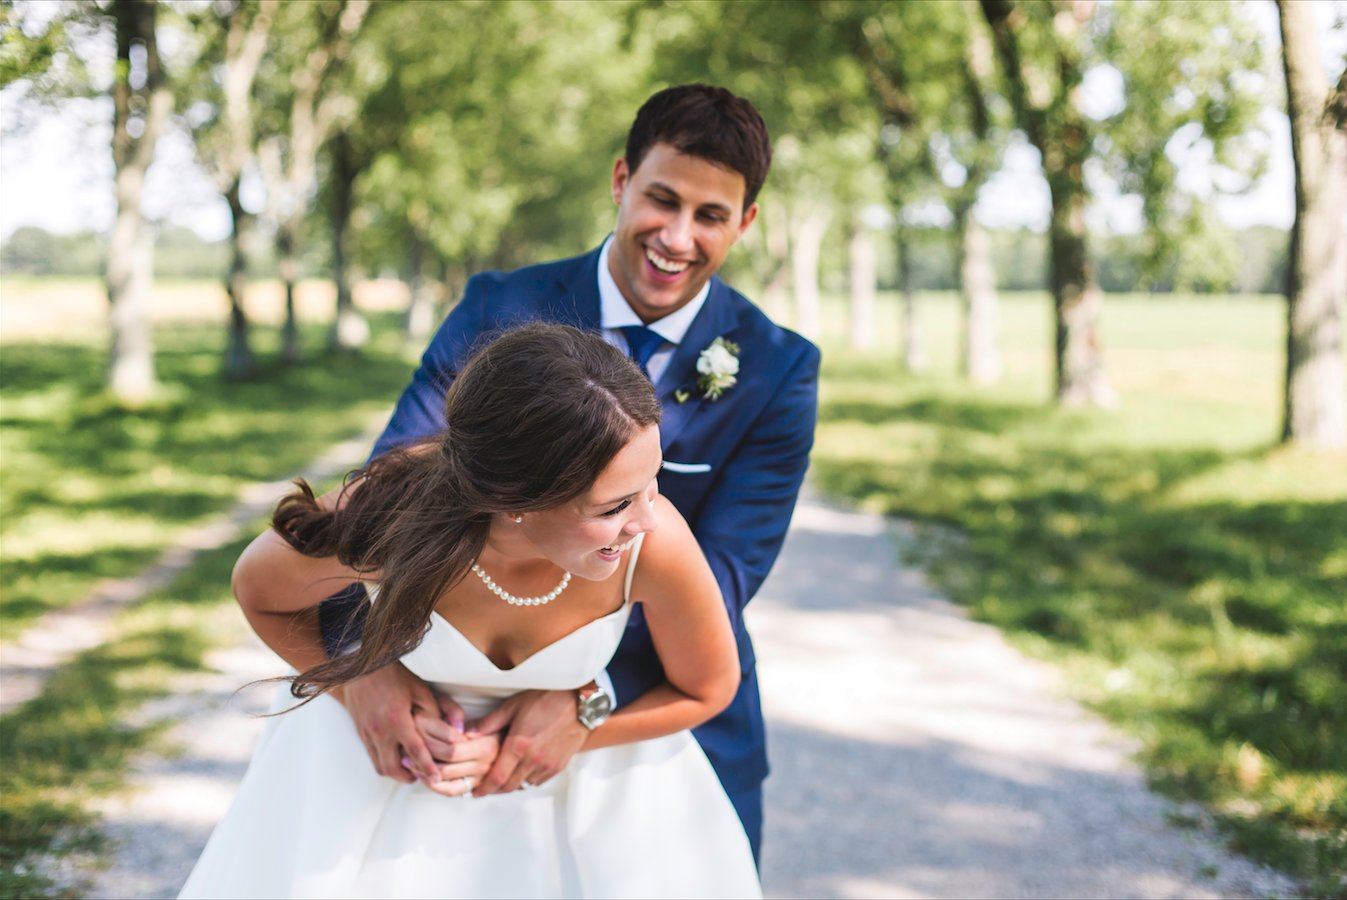 Wedding-Photographer-Niagara-on-the-Lake-Photographer-Queens-Landing-Moments-by-Lauren-Photo-Image-9.png